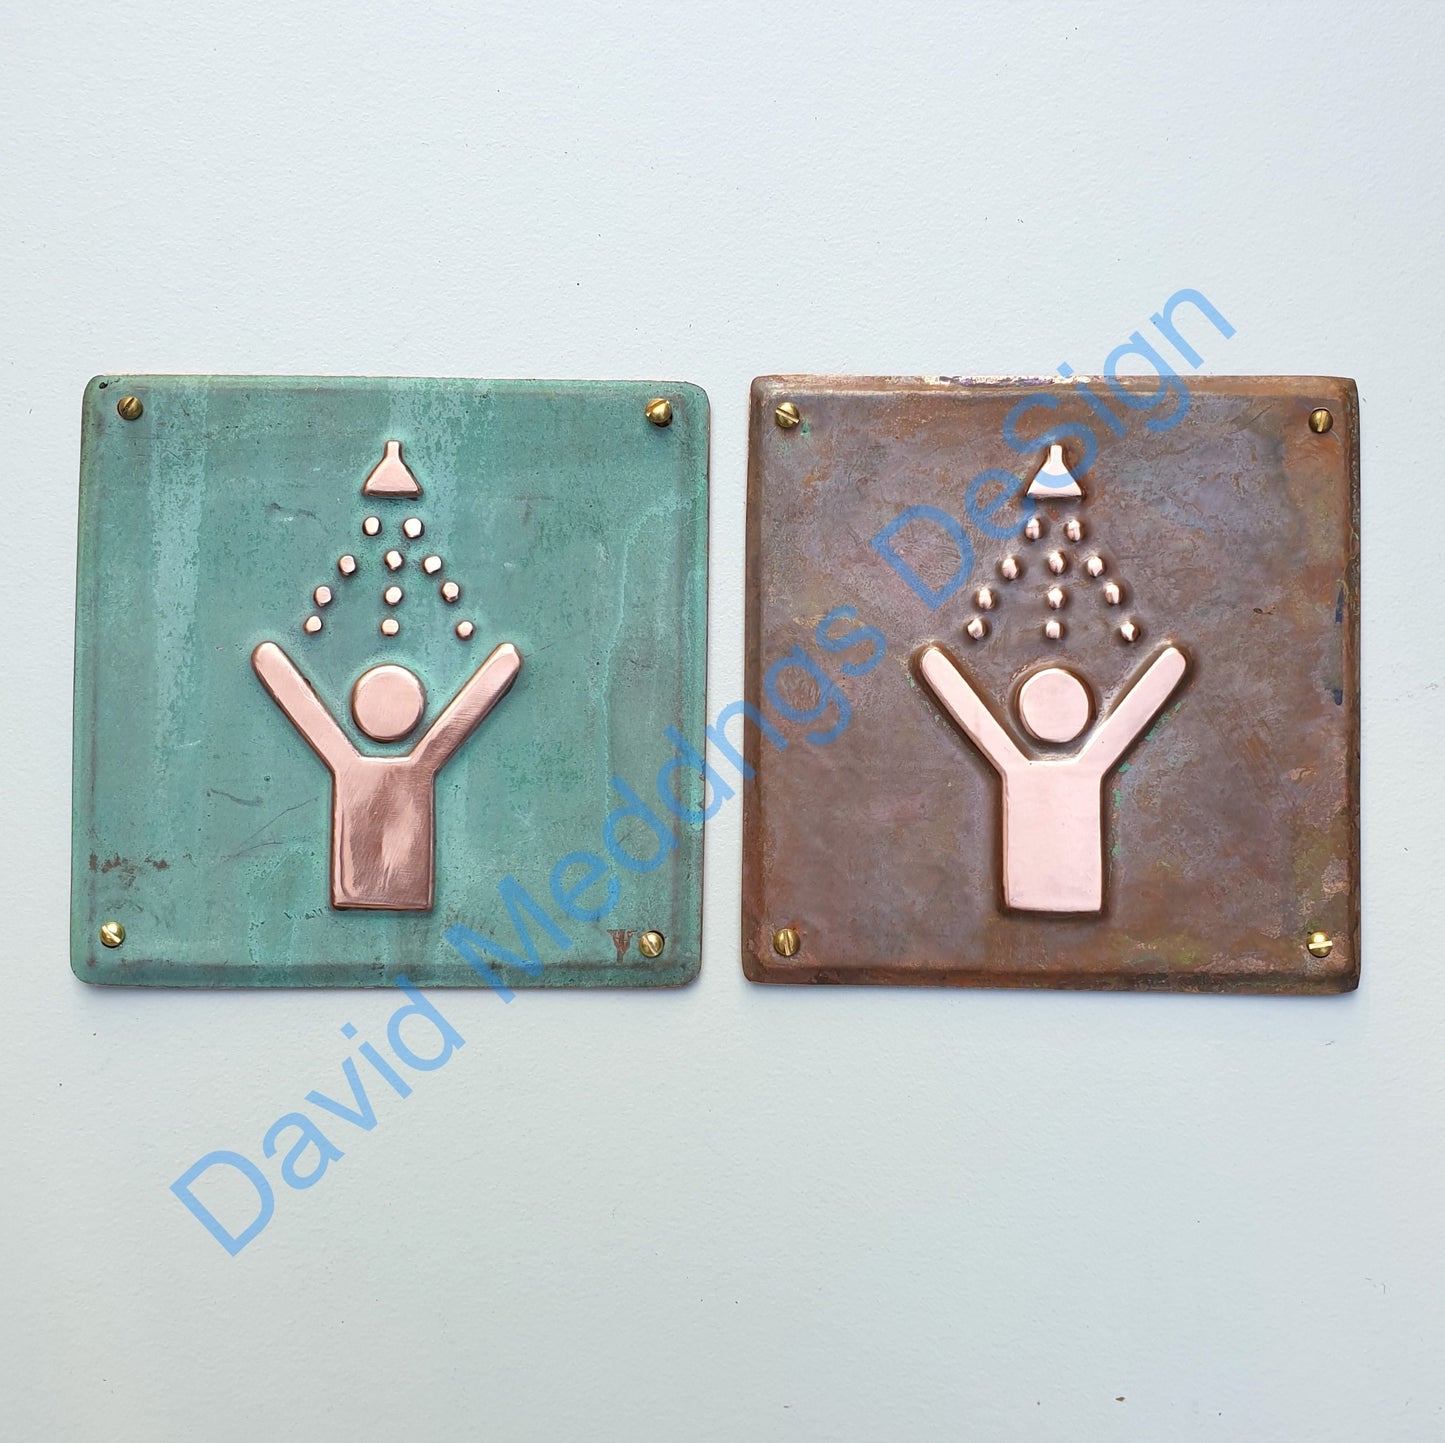 Shower copper door plaque in hammered or green - upcycled mothers day gift 4.2"/105mm square tx